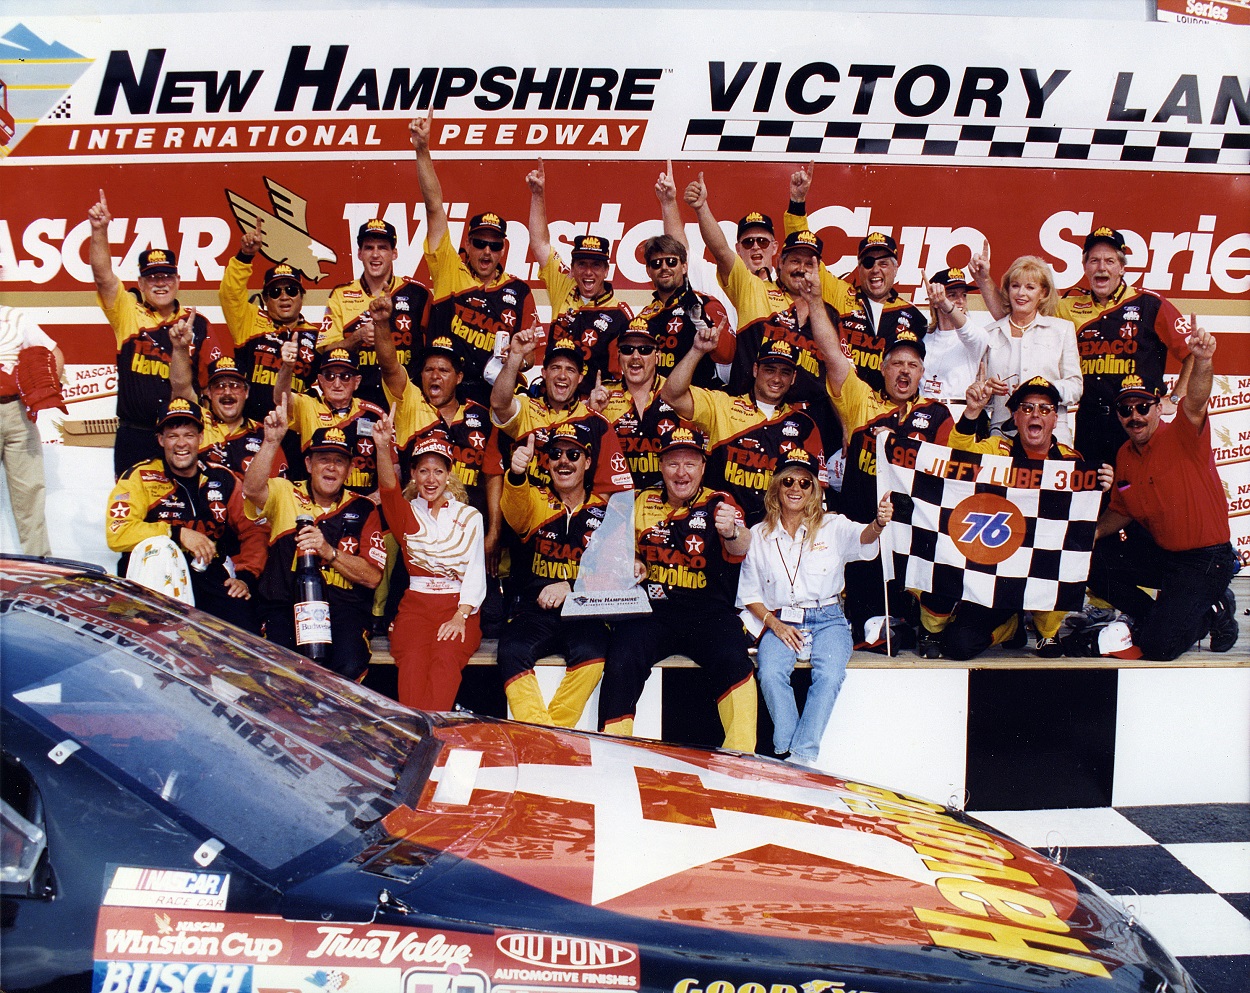 Ernie Irvan and his crew celebrate after winning the 1996 NASCAR Cup Series Jiffy Lube 300 at New Hampshire Motor Speedway